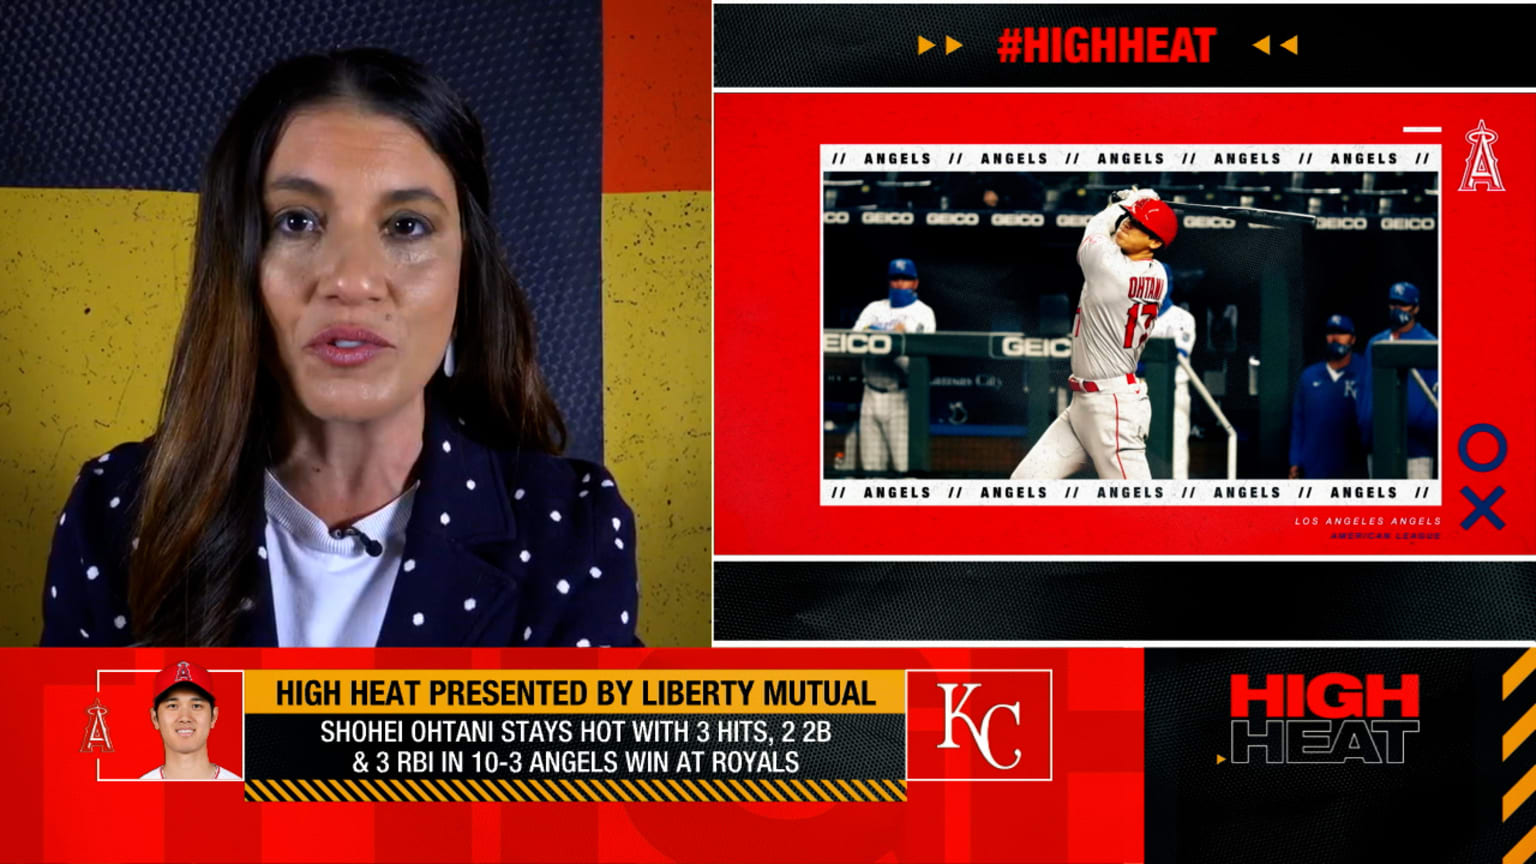 On High Heat, Alanna Rizzo discusses Shohei Ohtani's hot start, th...